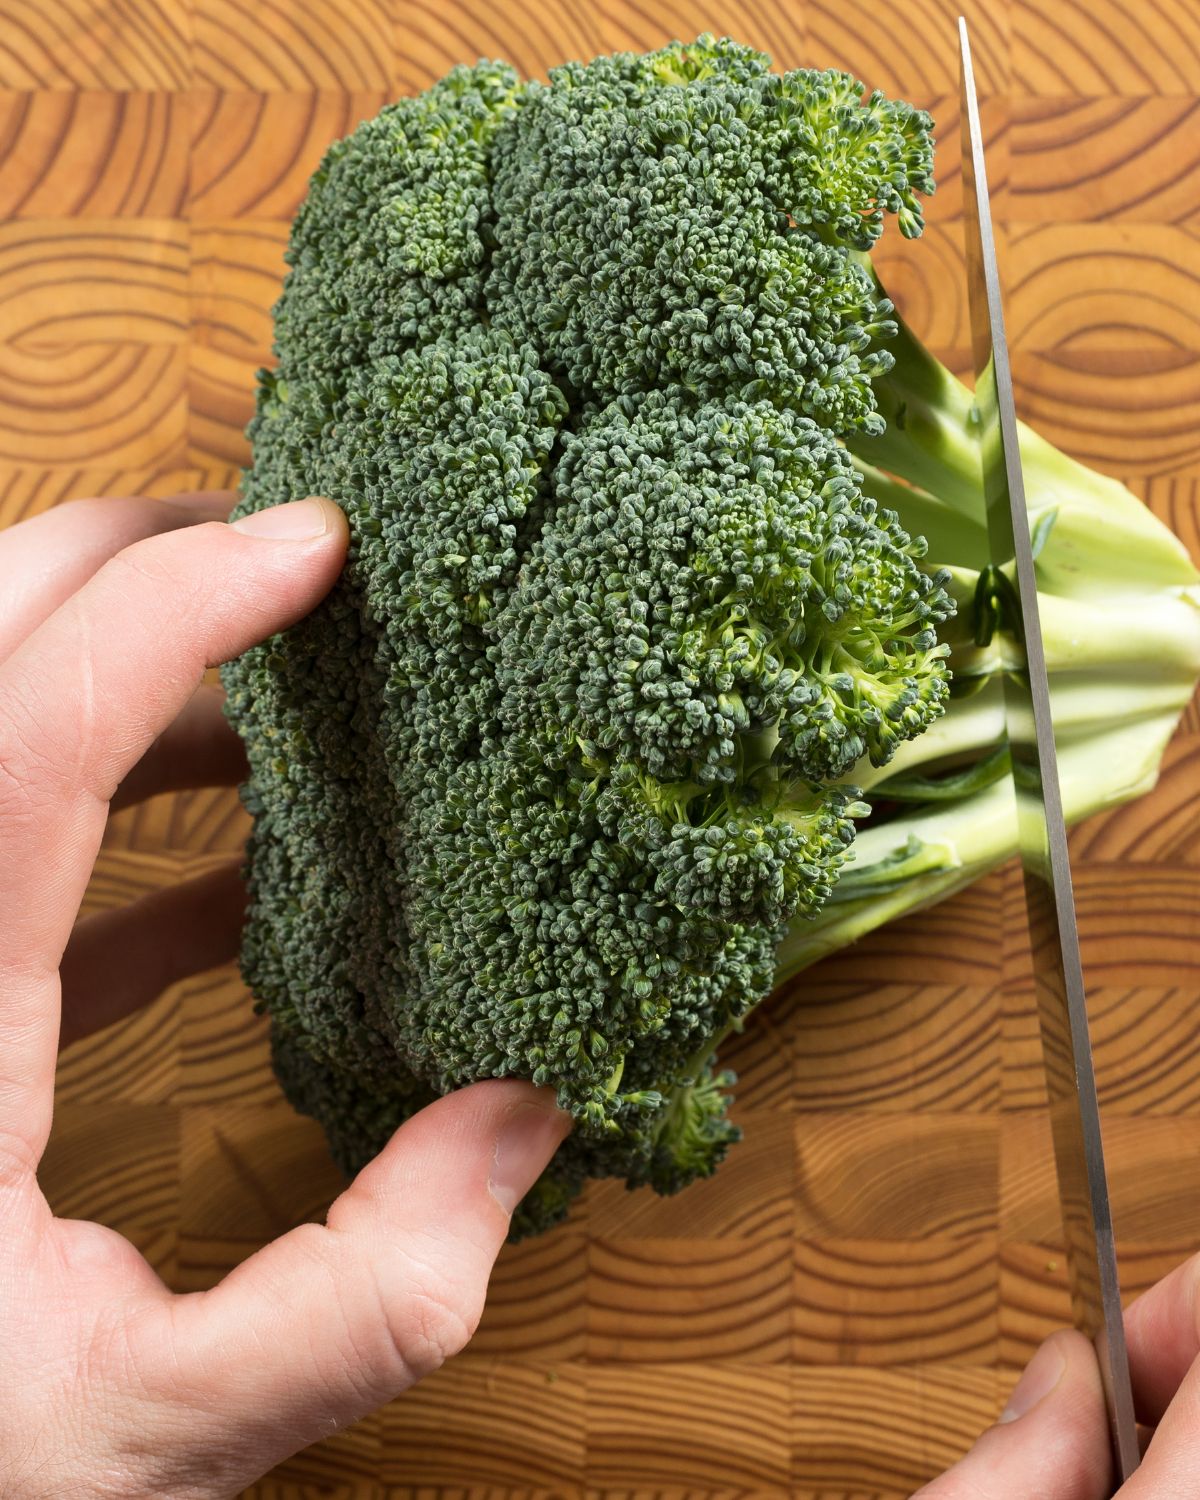 Chopping off the stem of the broccoli.